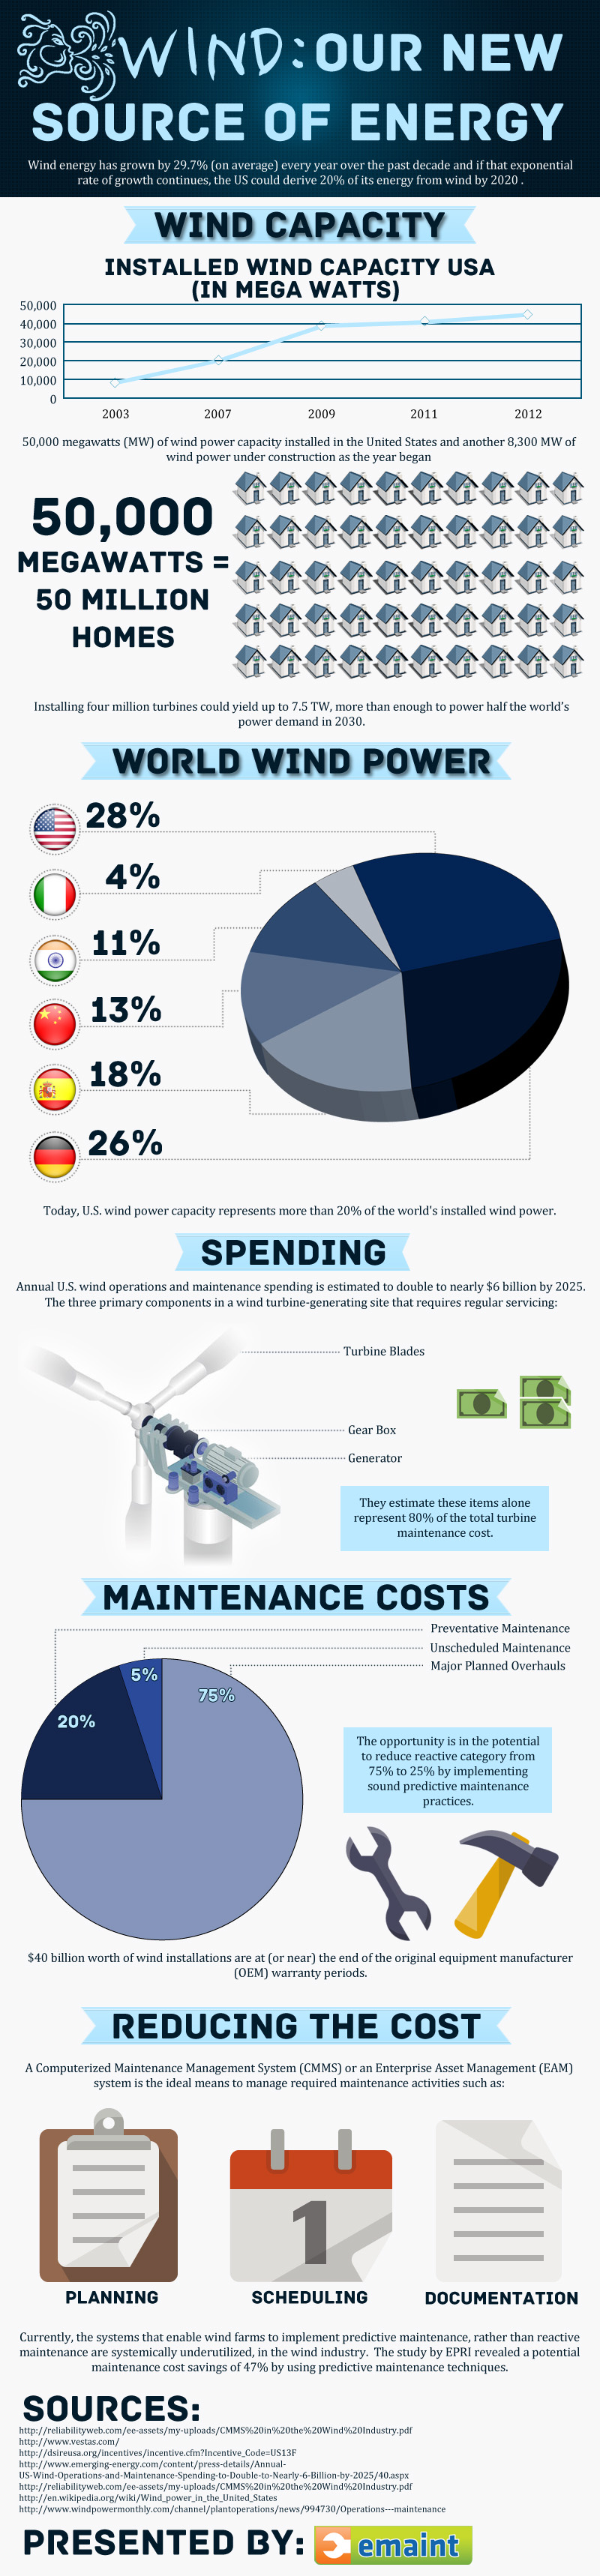 Wind Power Maintenance Costs-Infographic